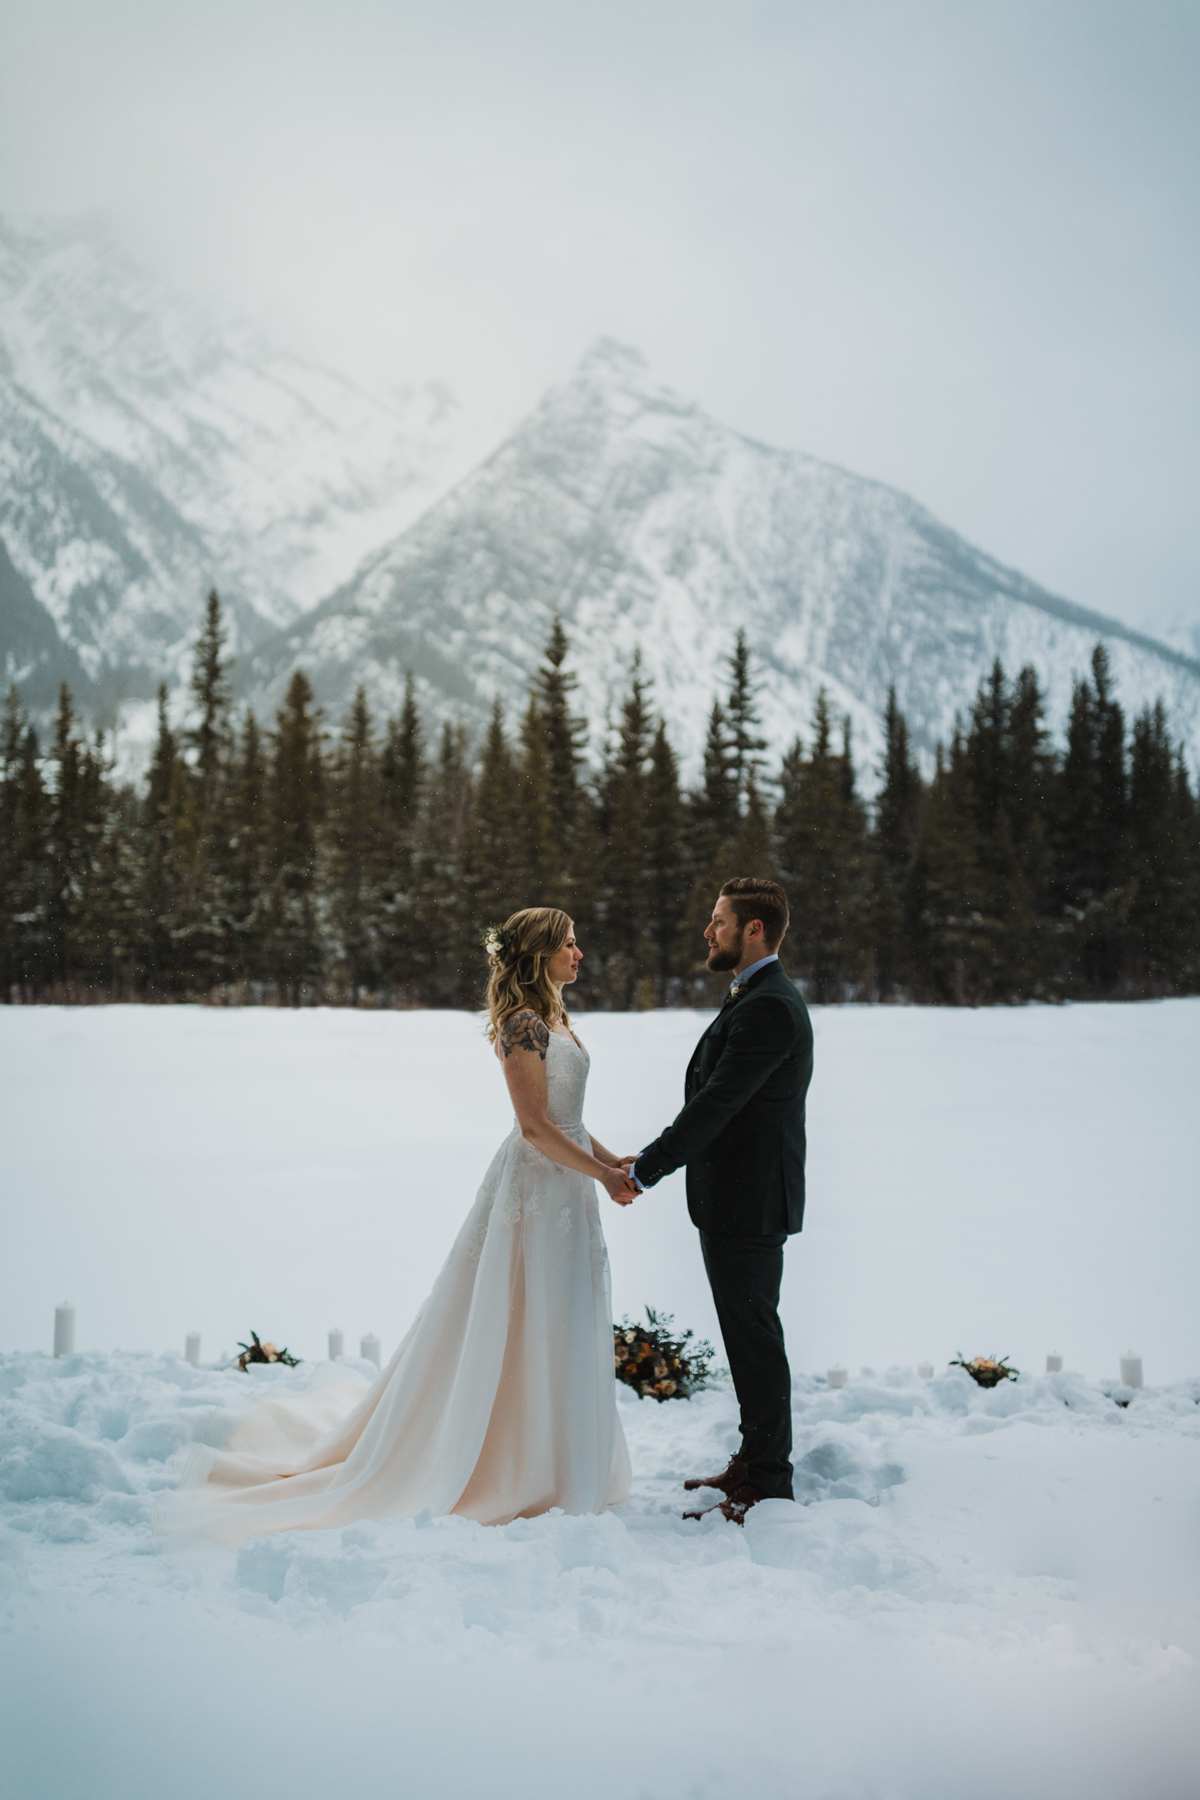 Canmore Elopement Photographer in the Canadian Rockies - Image 19